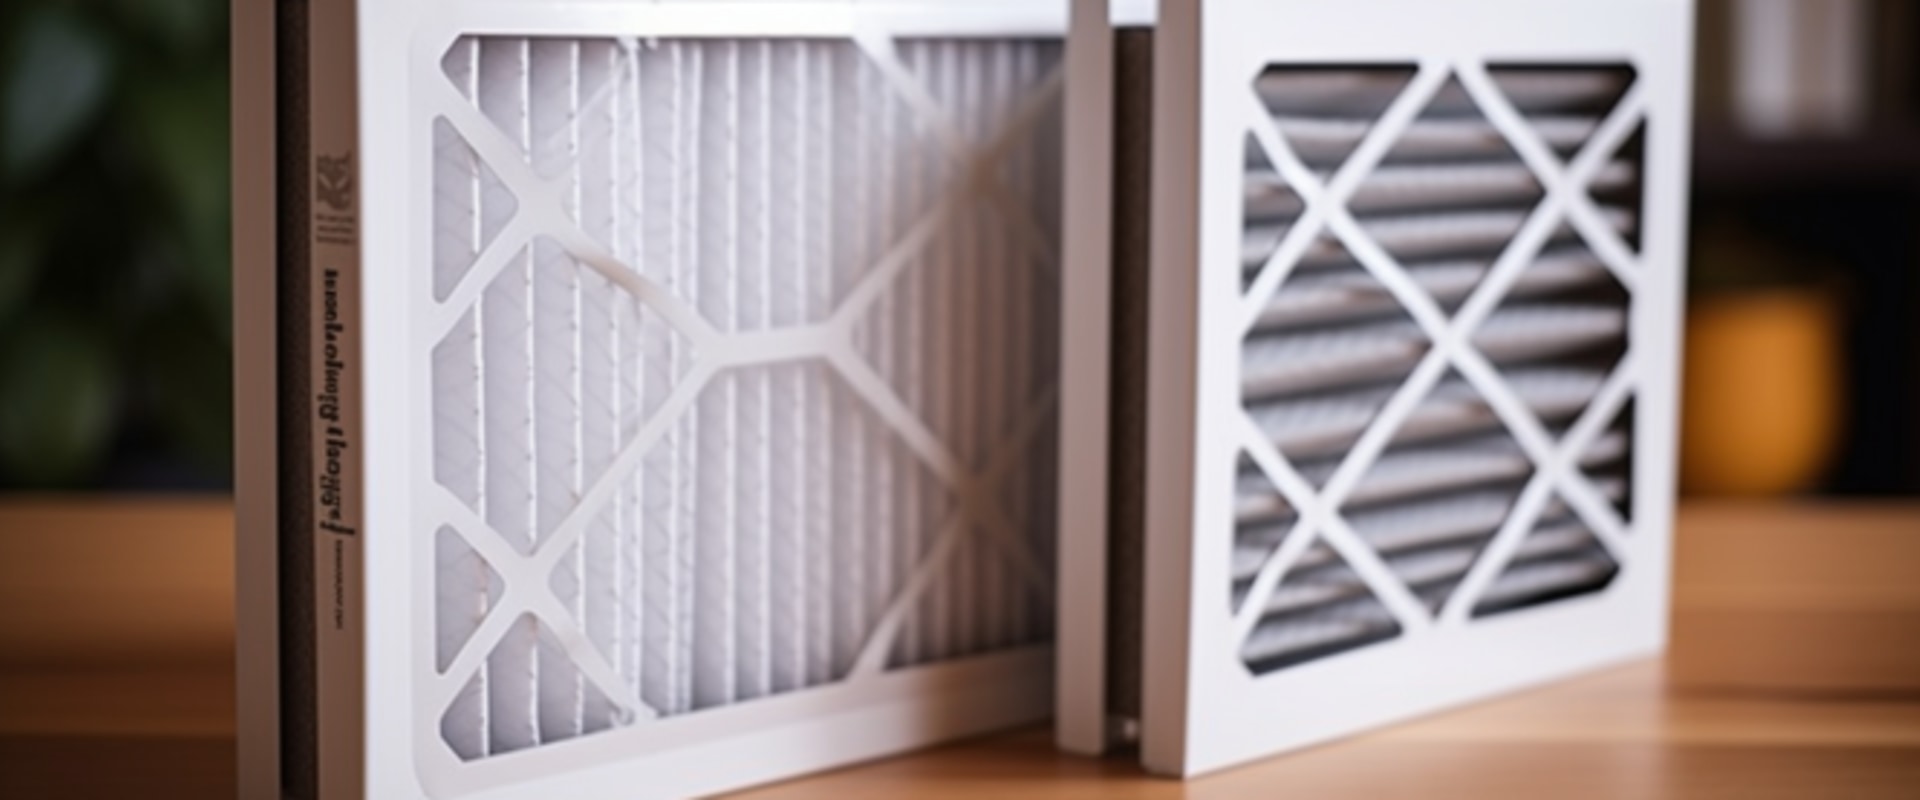 Air Quality Simplified By Finding Your Ideal Filter Subscription